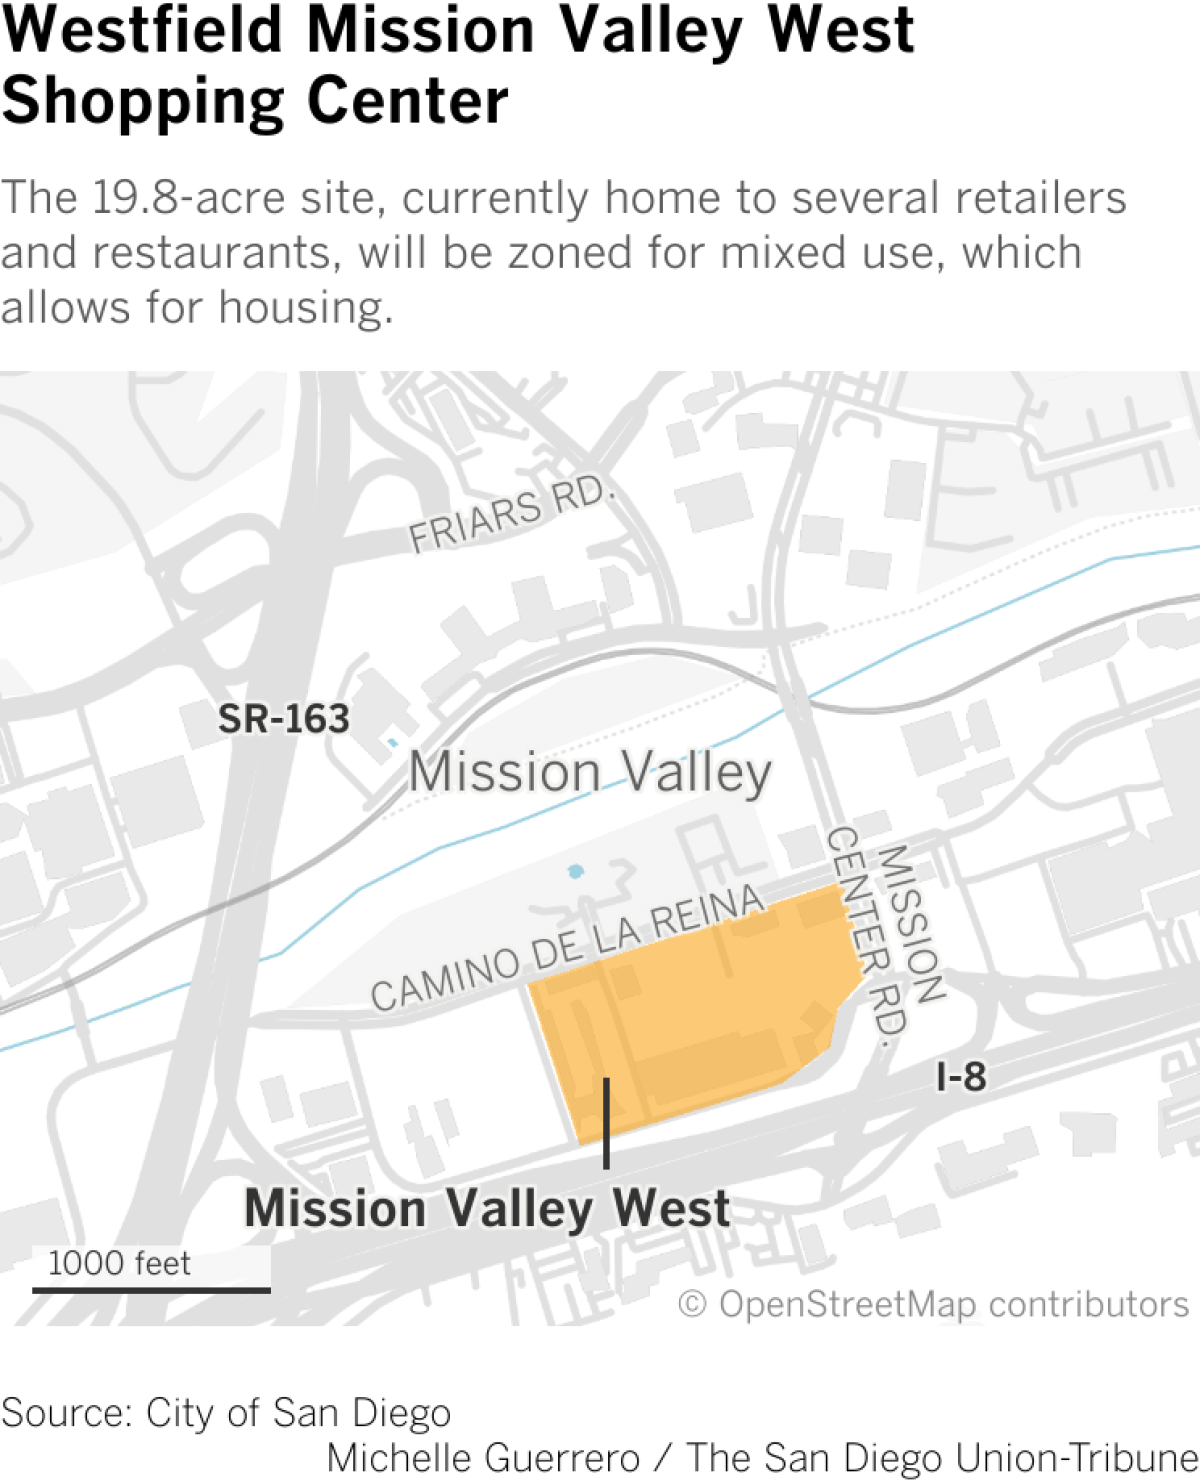 Housing now allowed at Westfield Mission Valley West shopping center - The  San Diego Union-Tribune